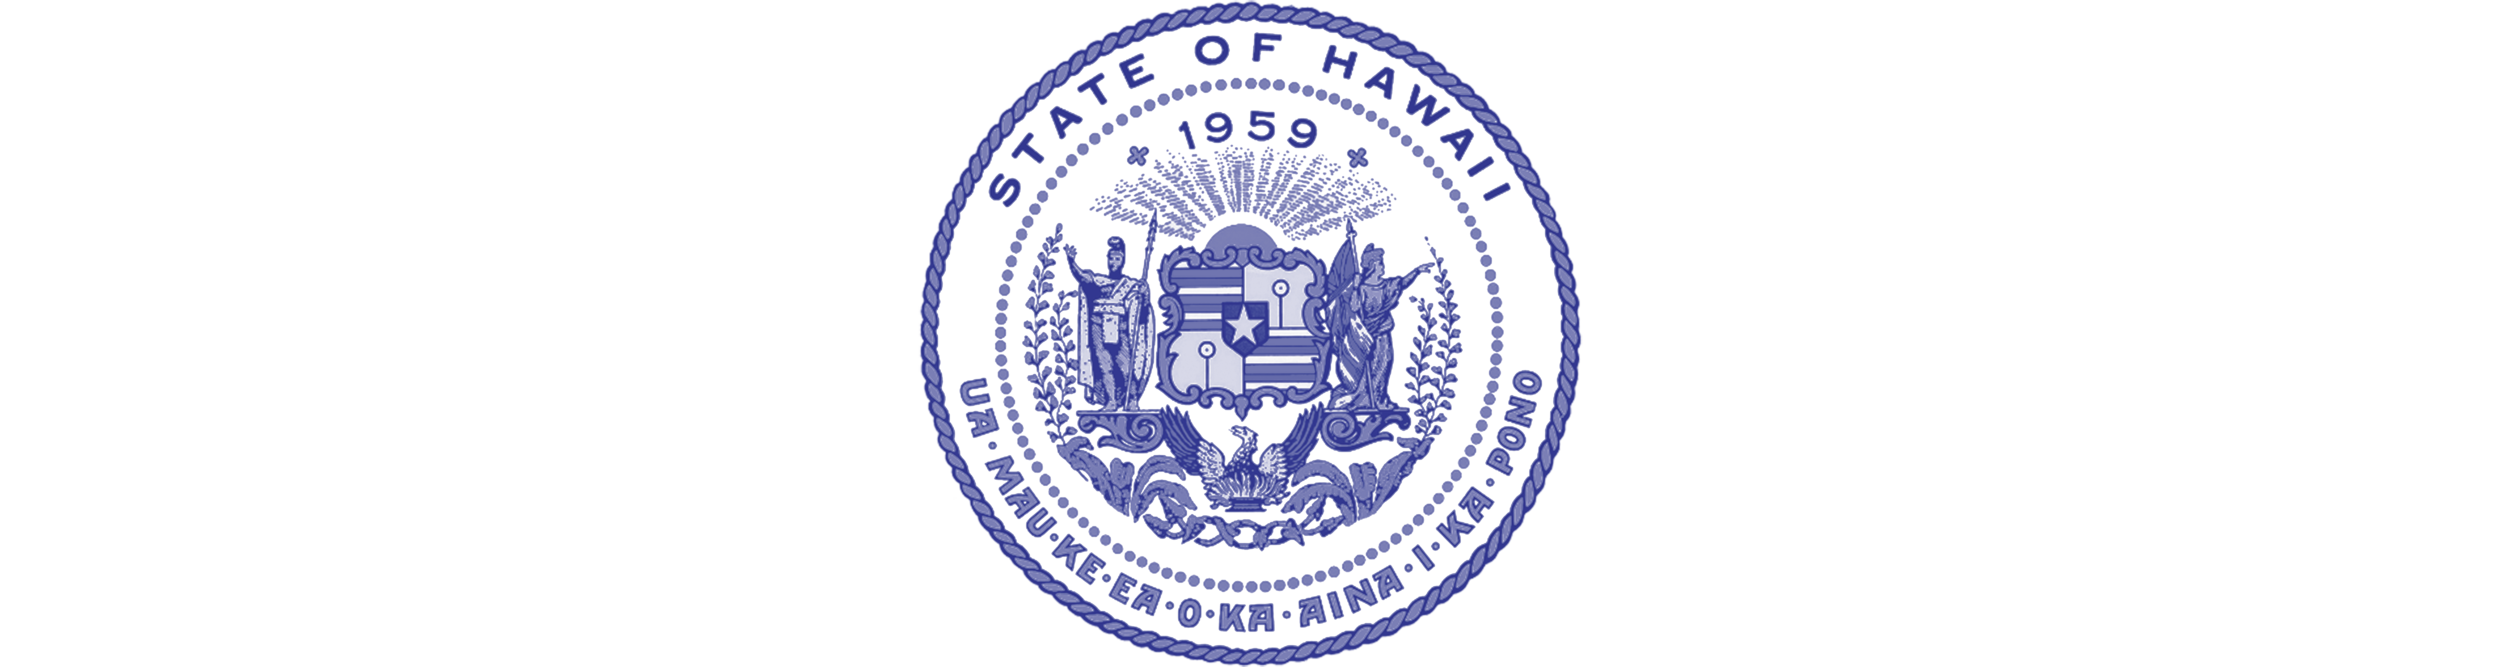 HPHA-resources-logo-State-Hawaii. png